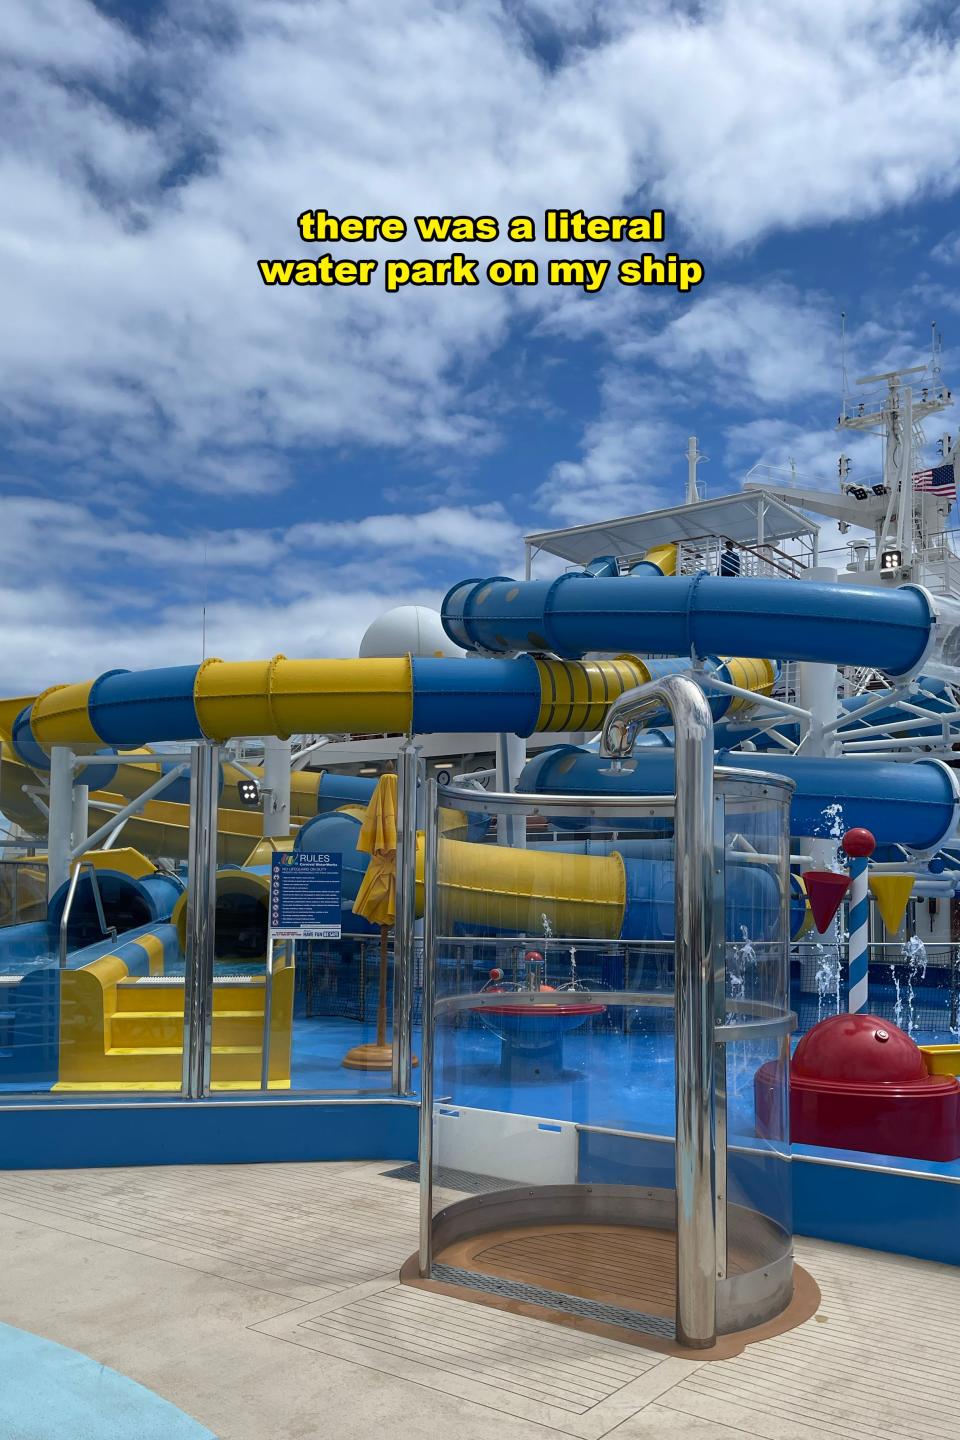 Water park on cruise ship deck with slides and play areas, captioned about its presence on the ship